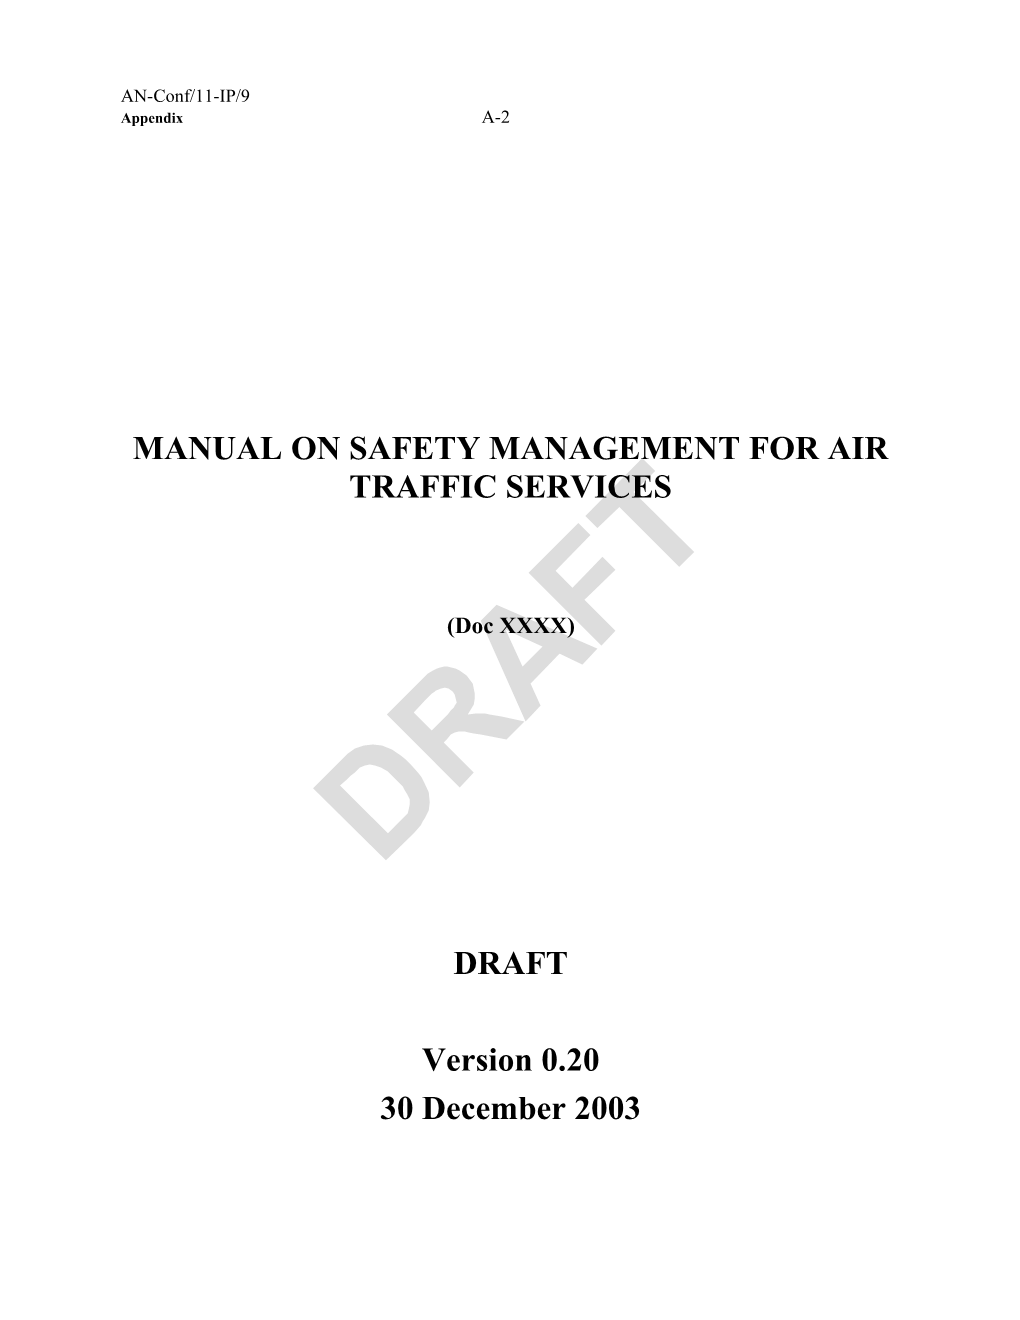 For Air Traffic Services